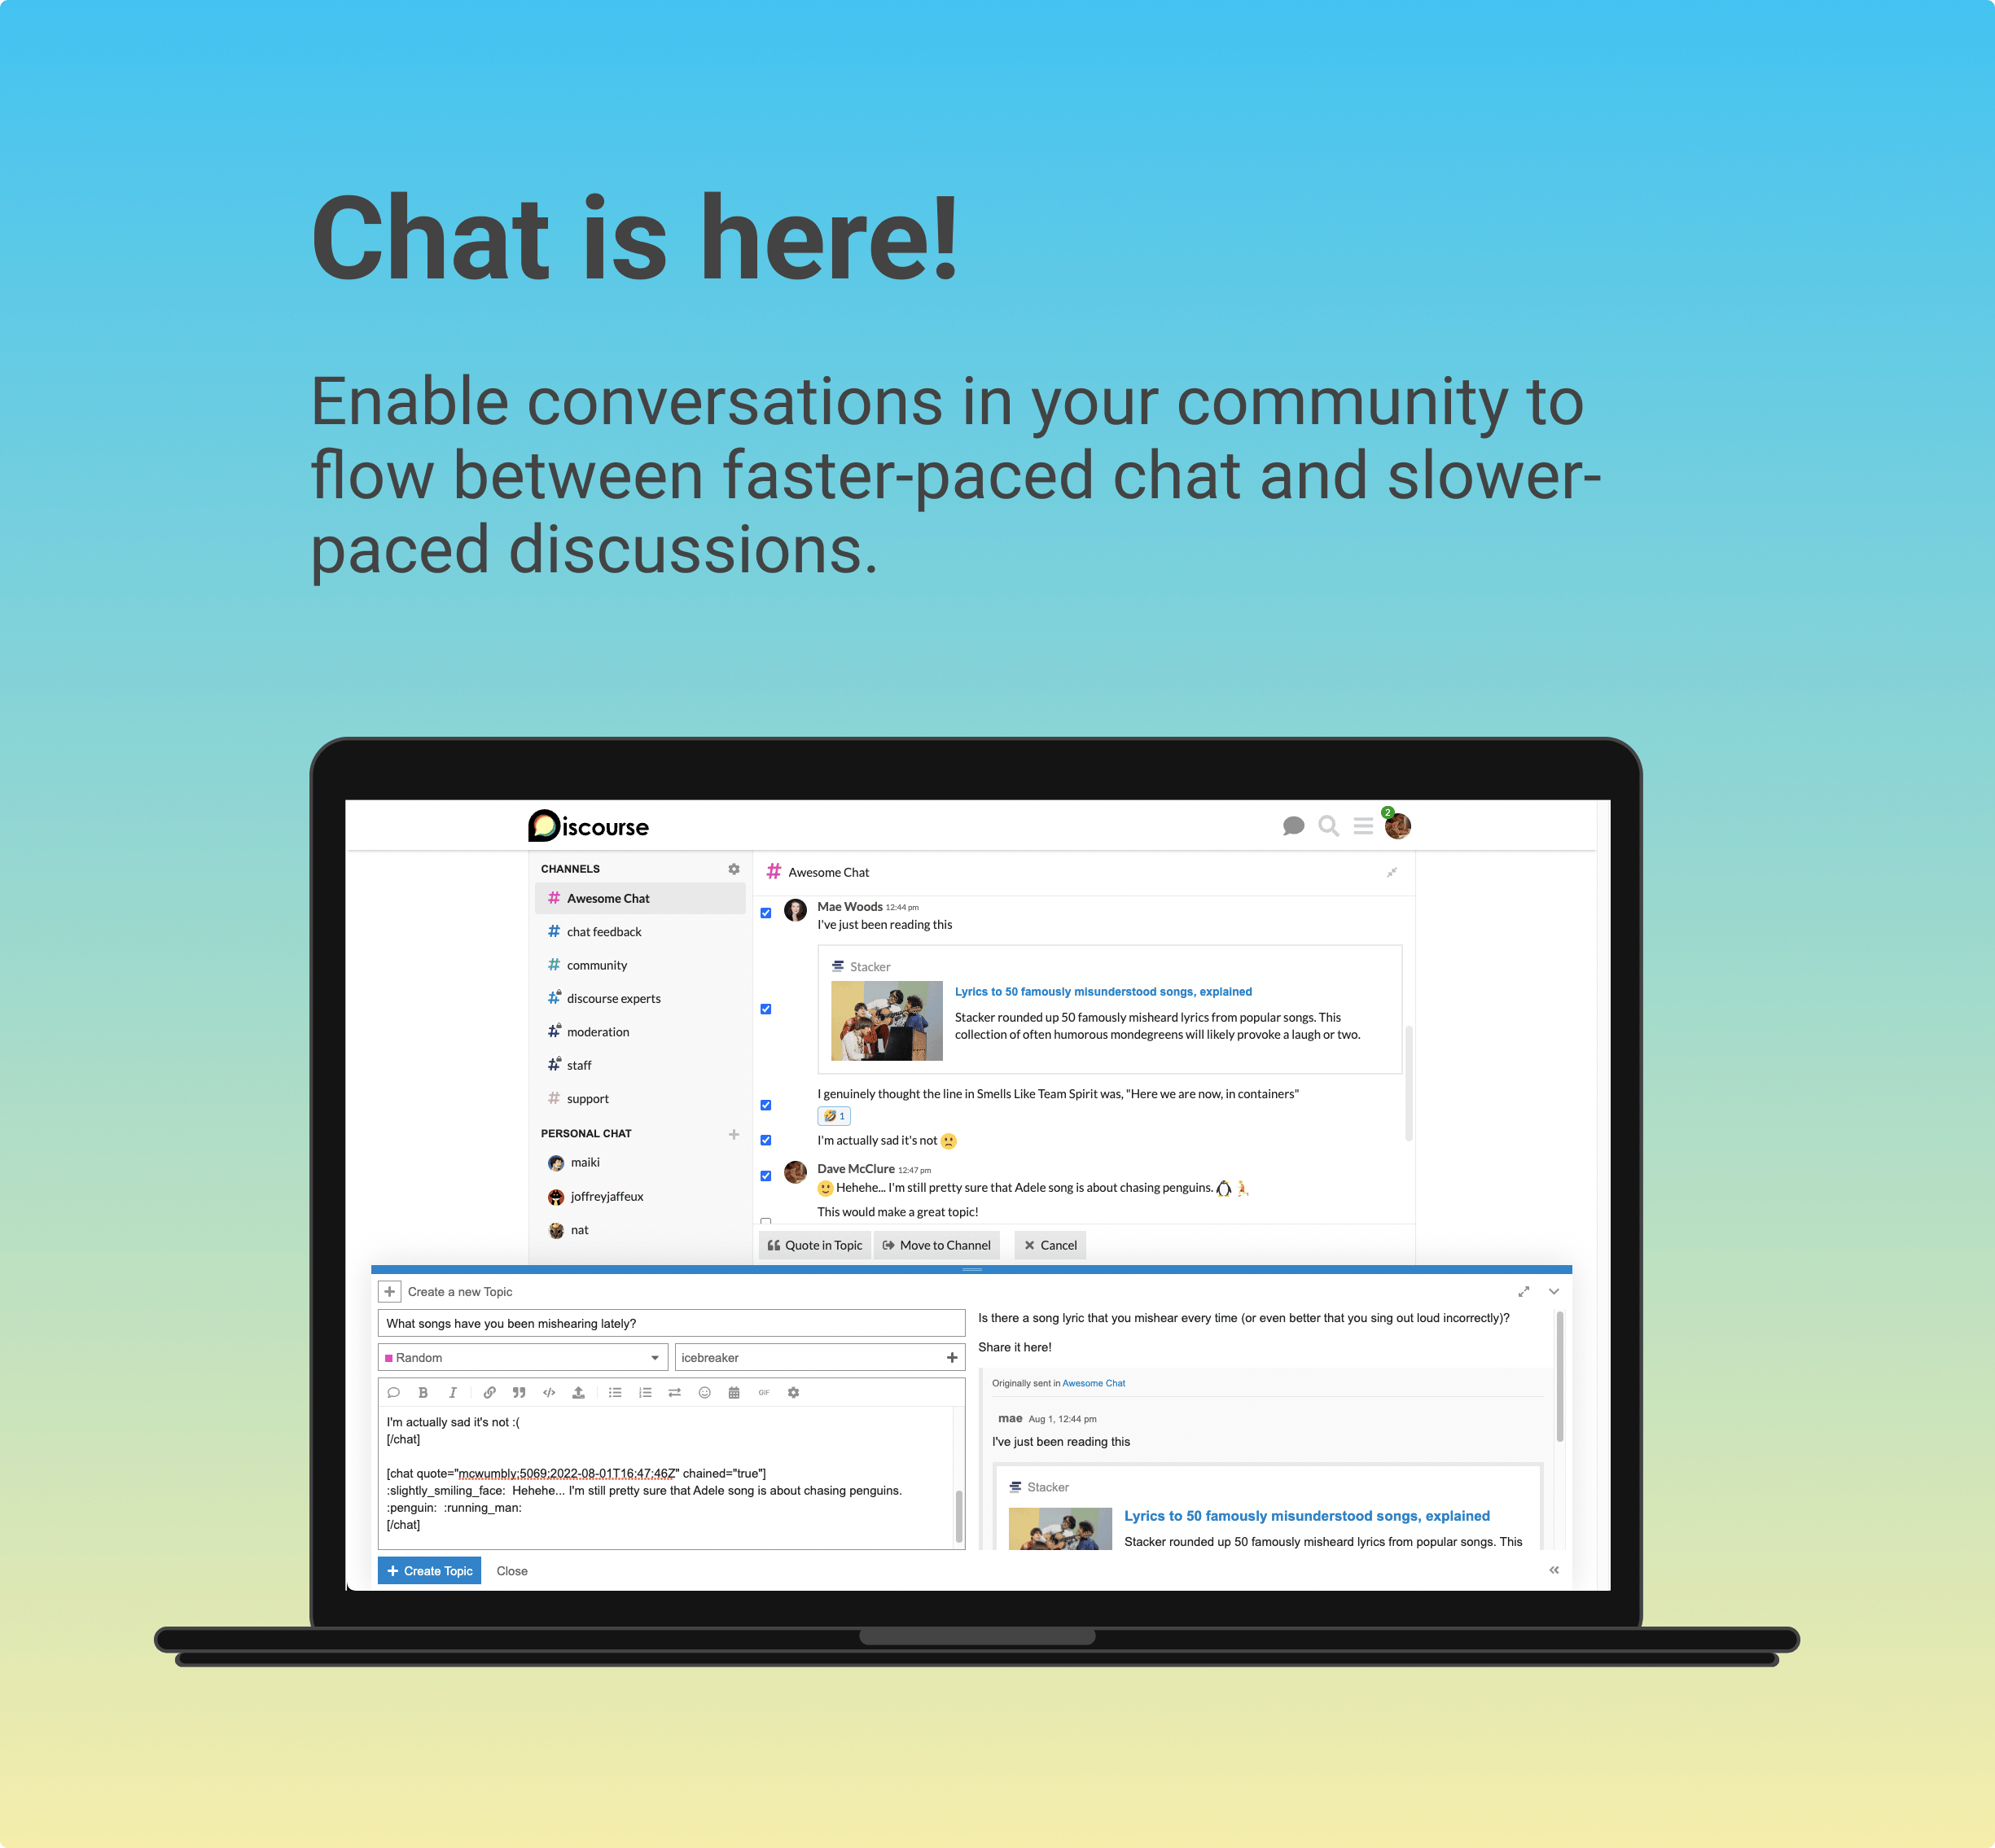 Chat is here! Enable conversations in your community to flow between faster-paced chat and slower-paced discussions.